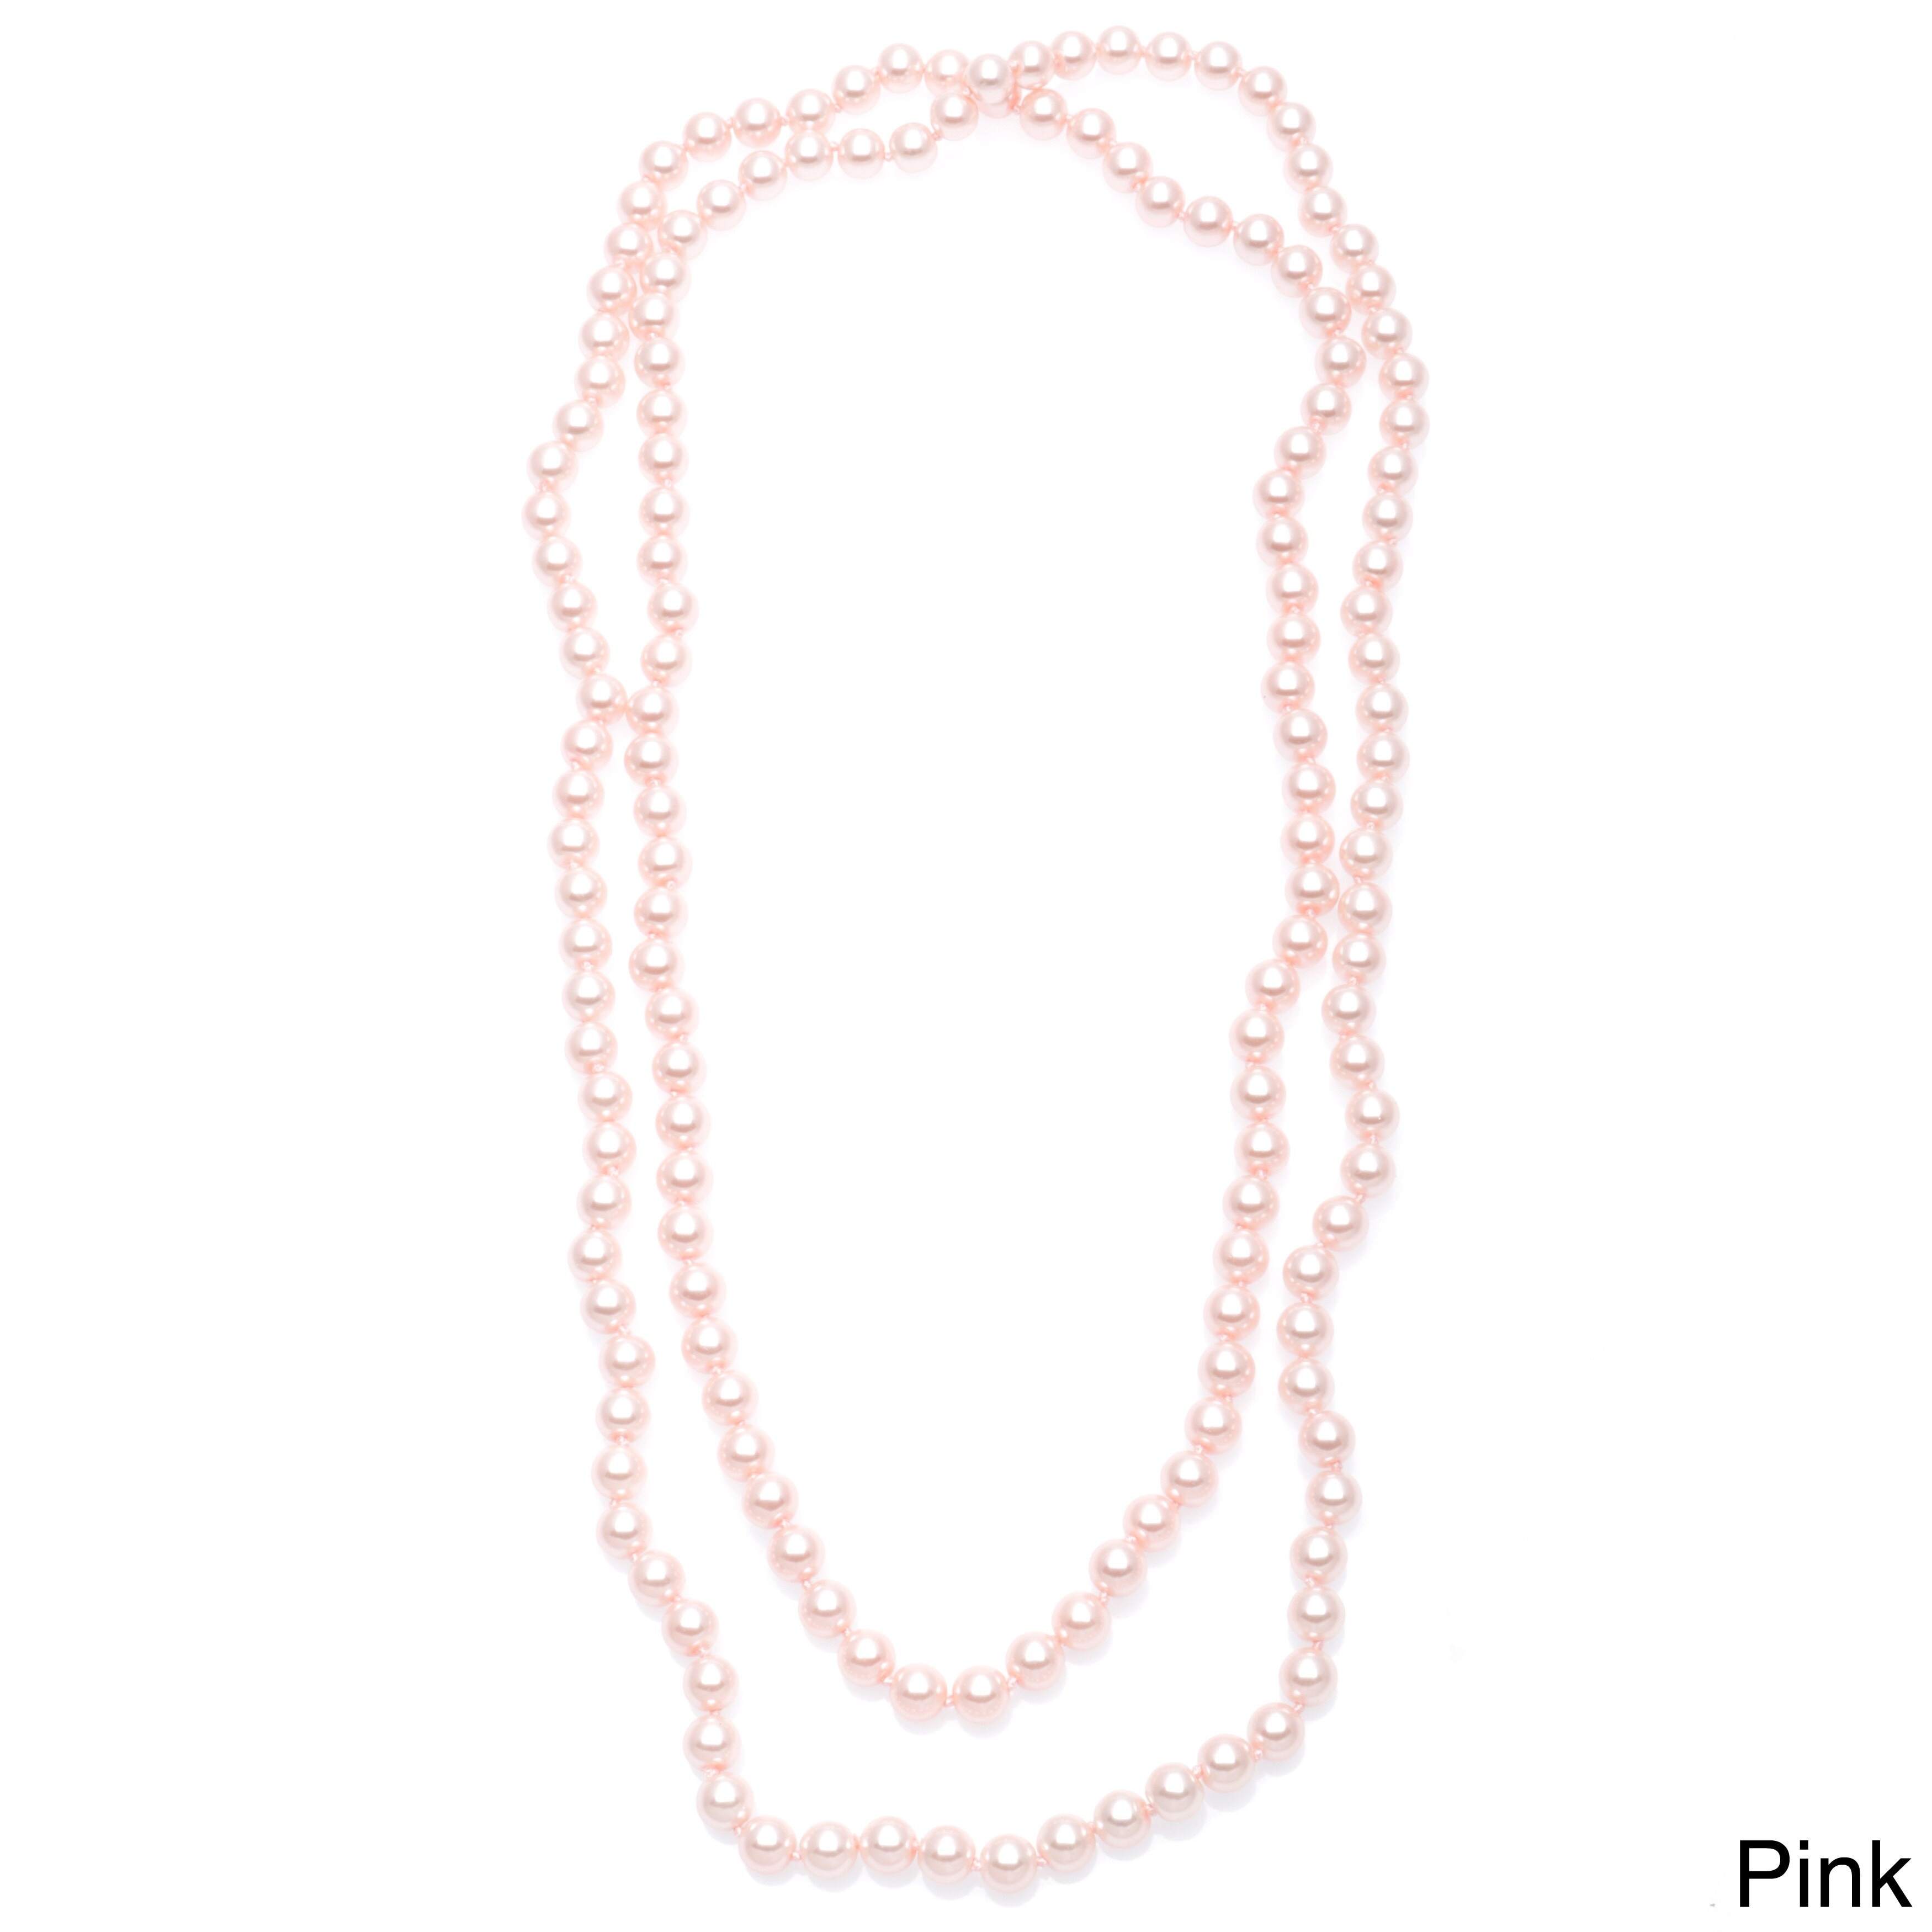 Alexa Starr Hand-knotted Endless 54-inch Glass Pearl Necklace (8-9 mm)